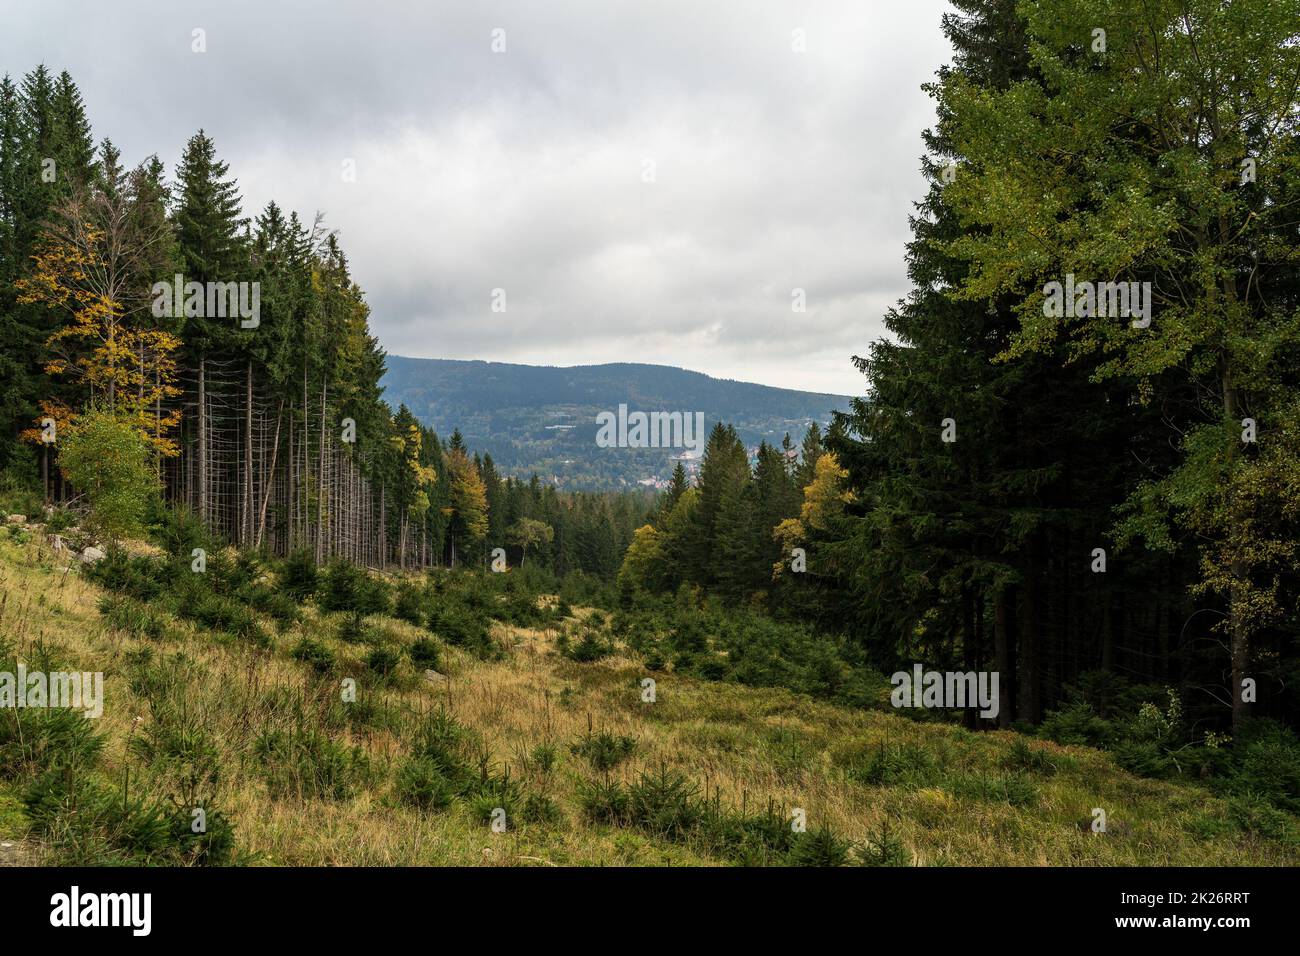 Autumn forest landscape in the Giant Mountains near the town of Karpacz. Stock Photo